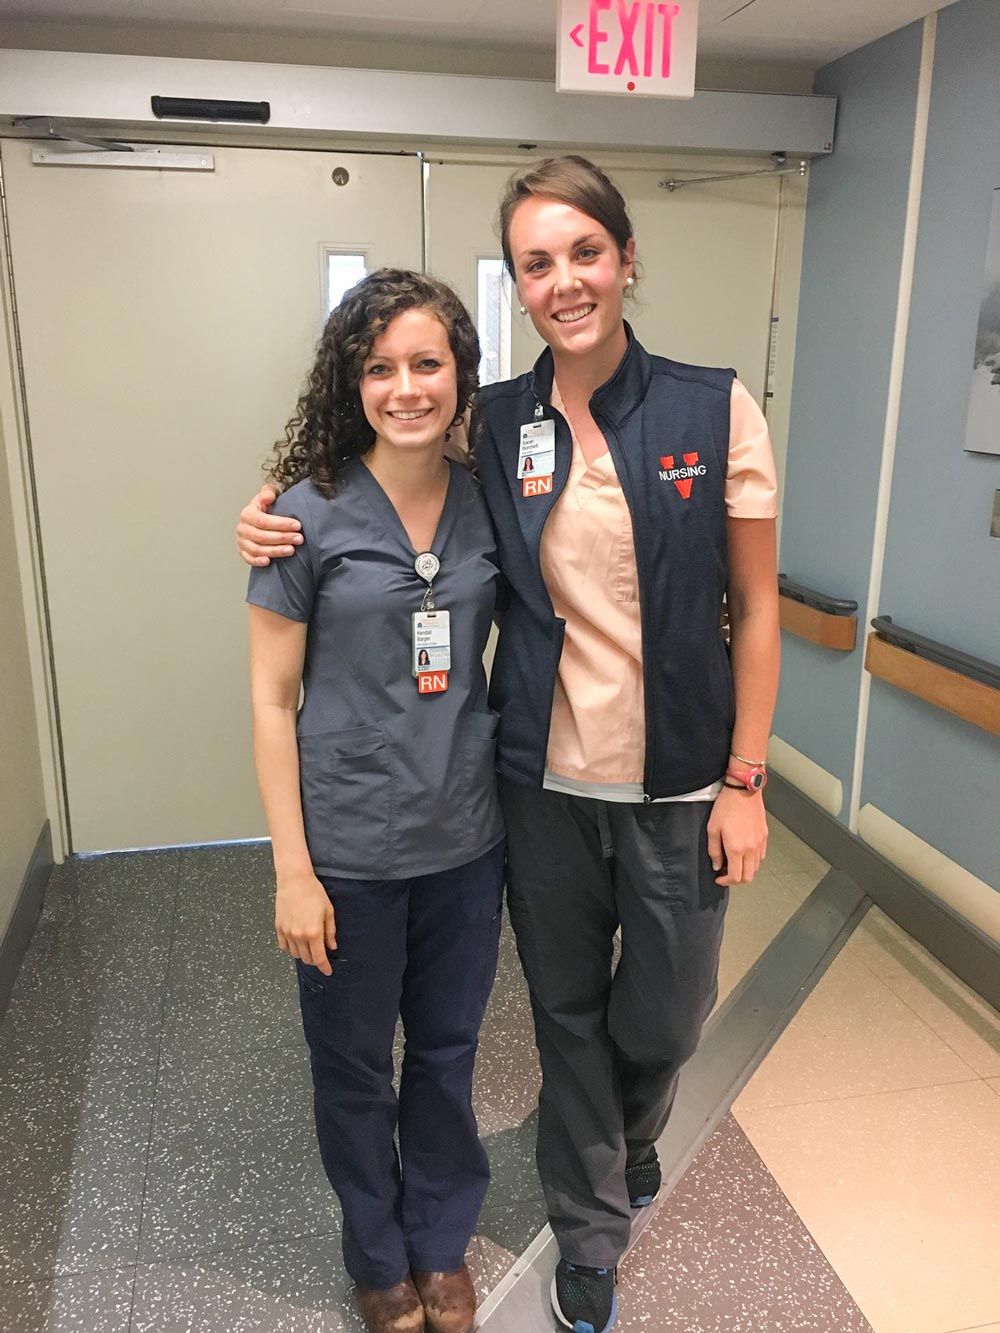 Sarah Borchelt (right) poses with fellow RN for a picture together